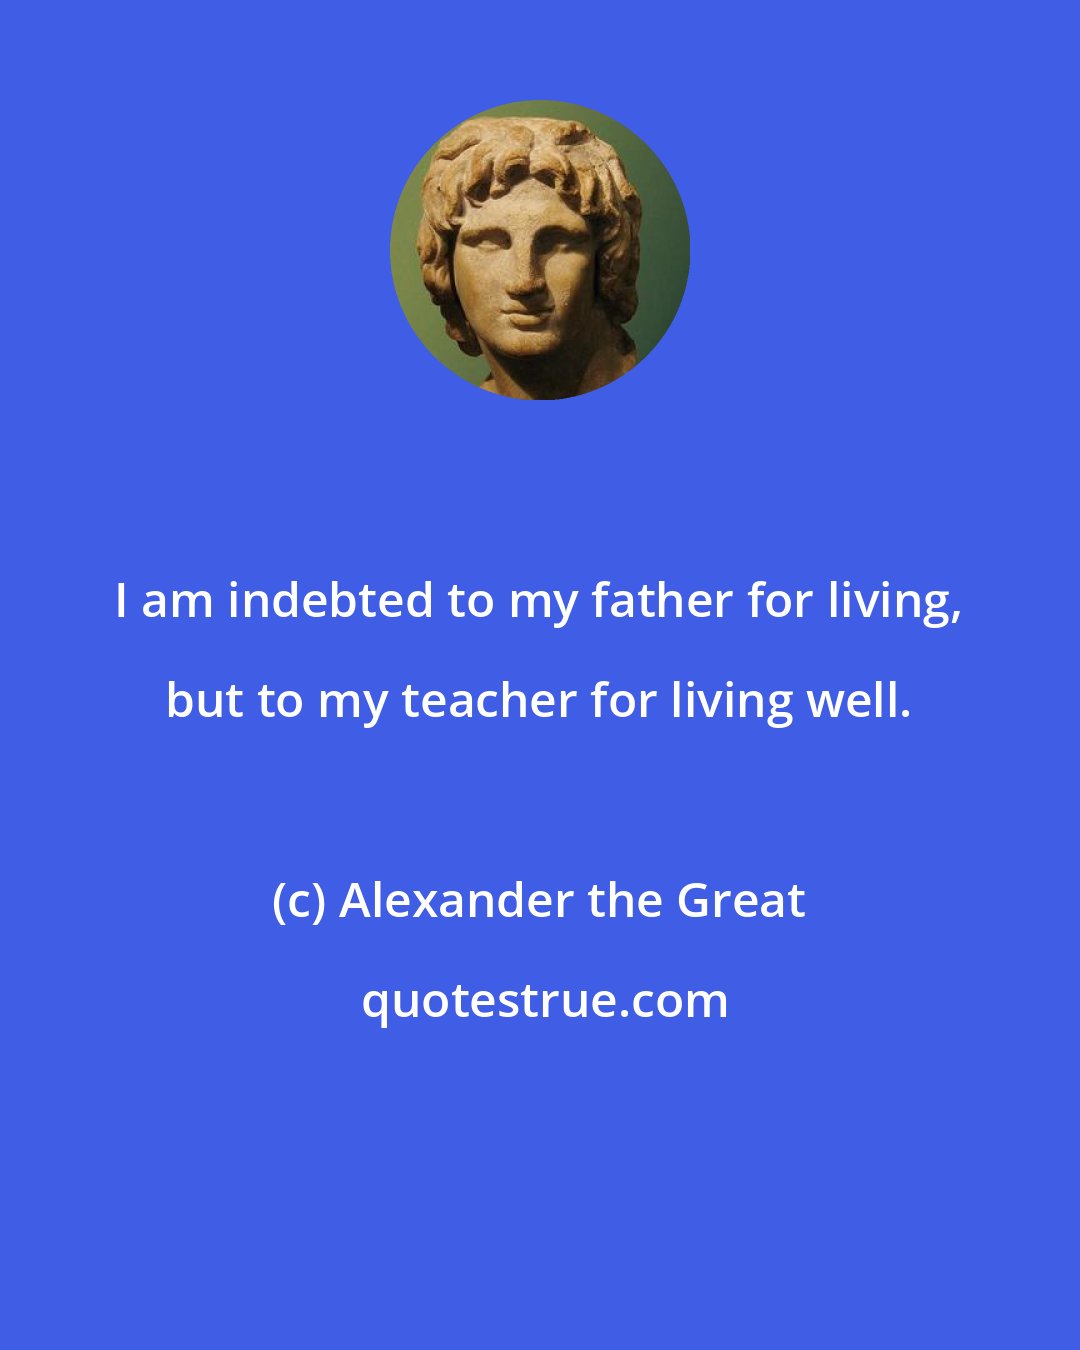 Alexander the Great: I am indebted to my father for living, but to my teacher for living well.